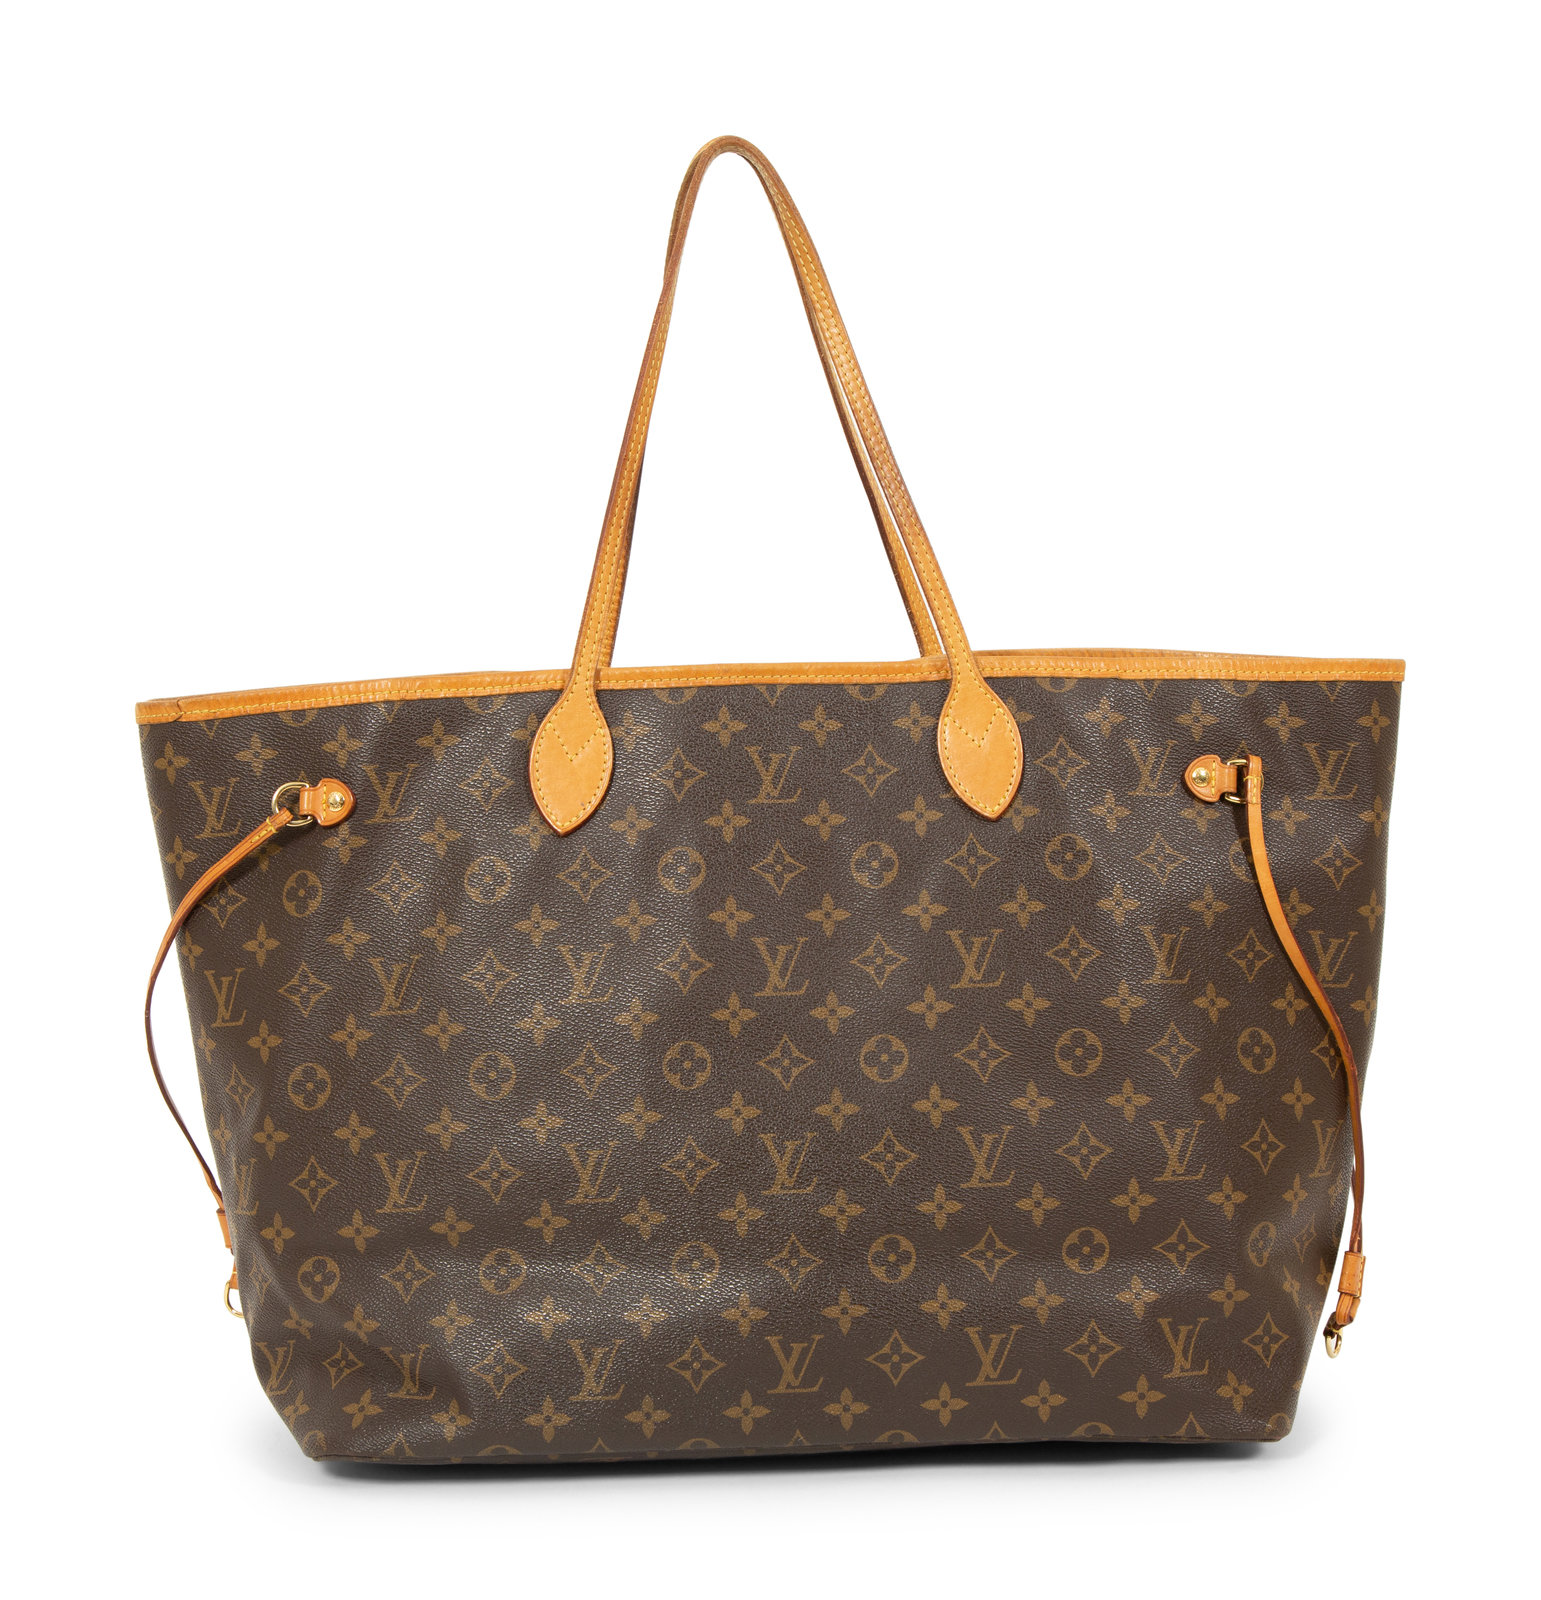 Sold at Auction: AUTHENTIC LOUIS VUITTON LOOPING MM MONOGRAM